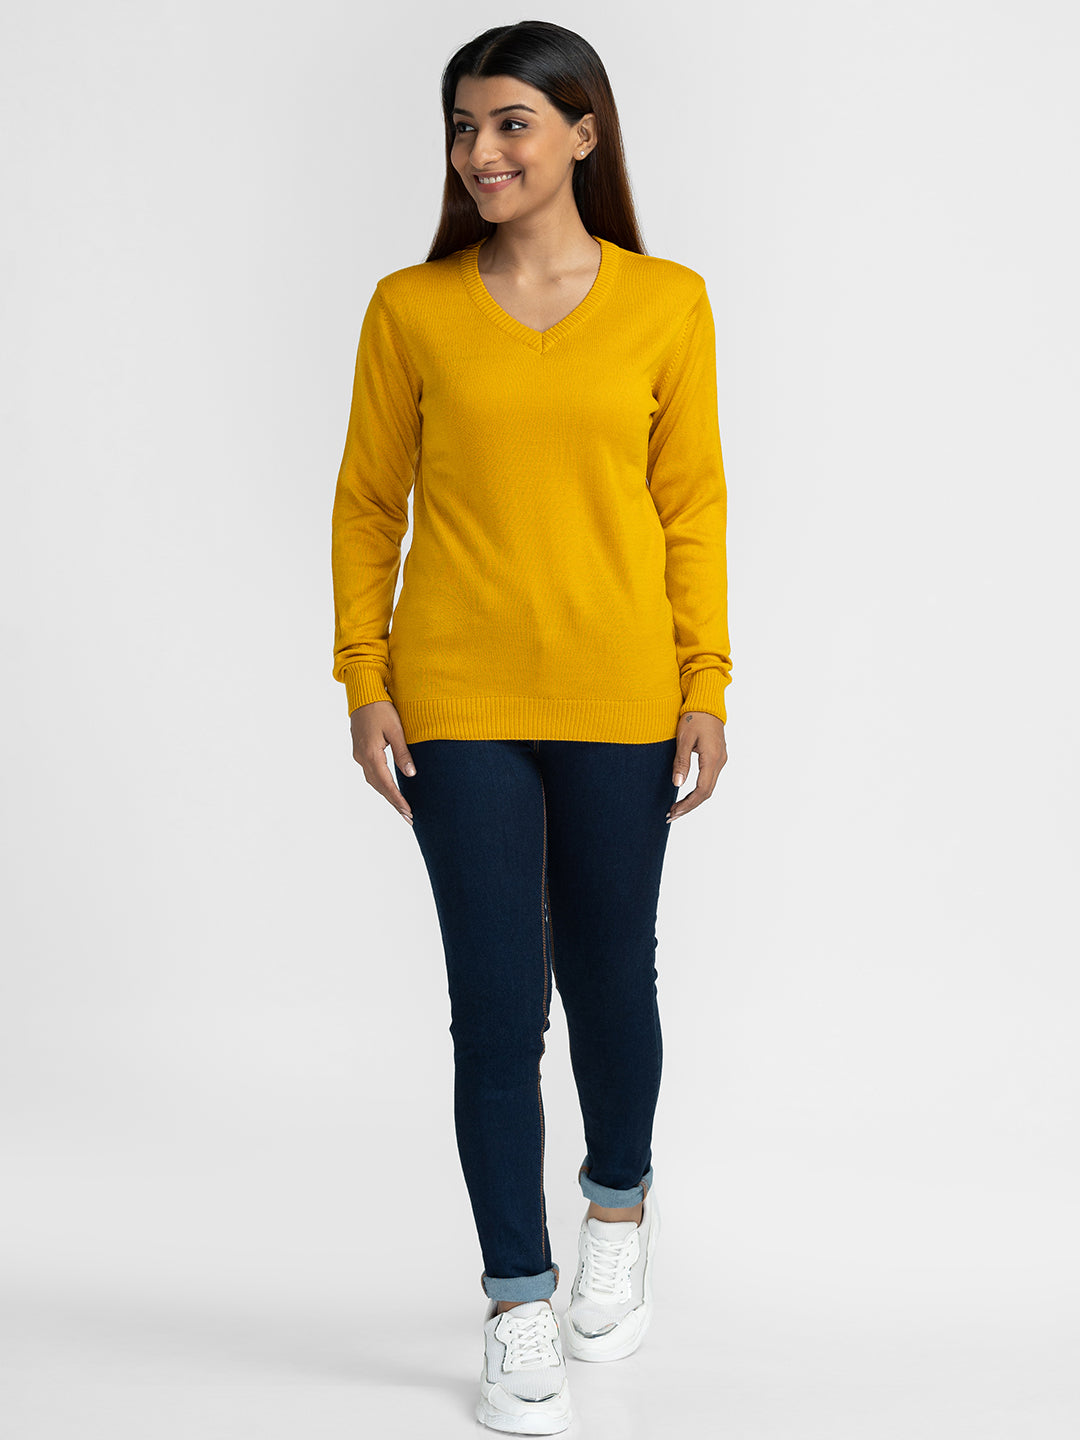 Globus Yellow Solid Pullover Sweater